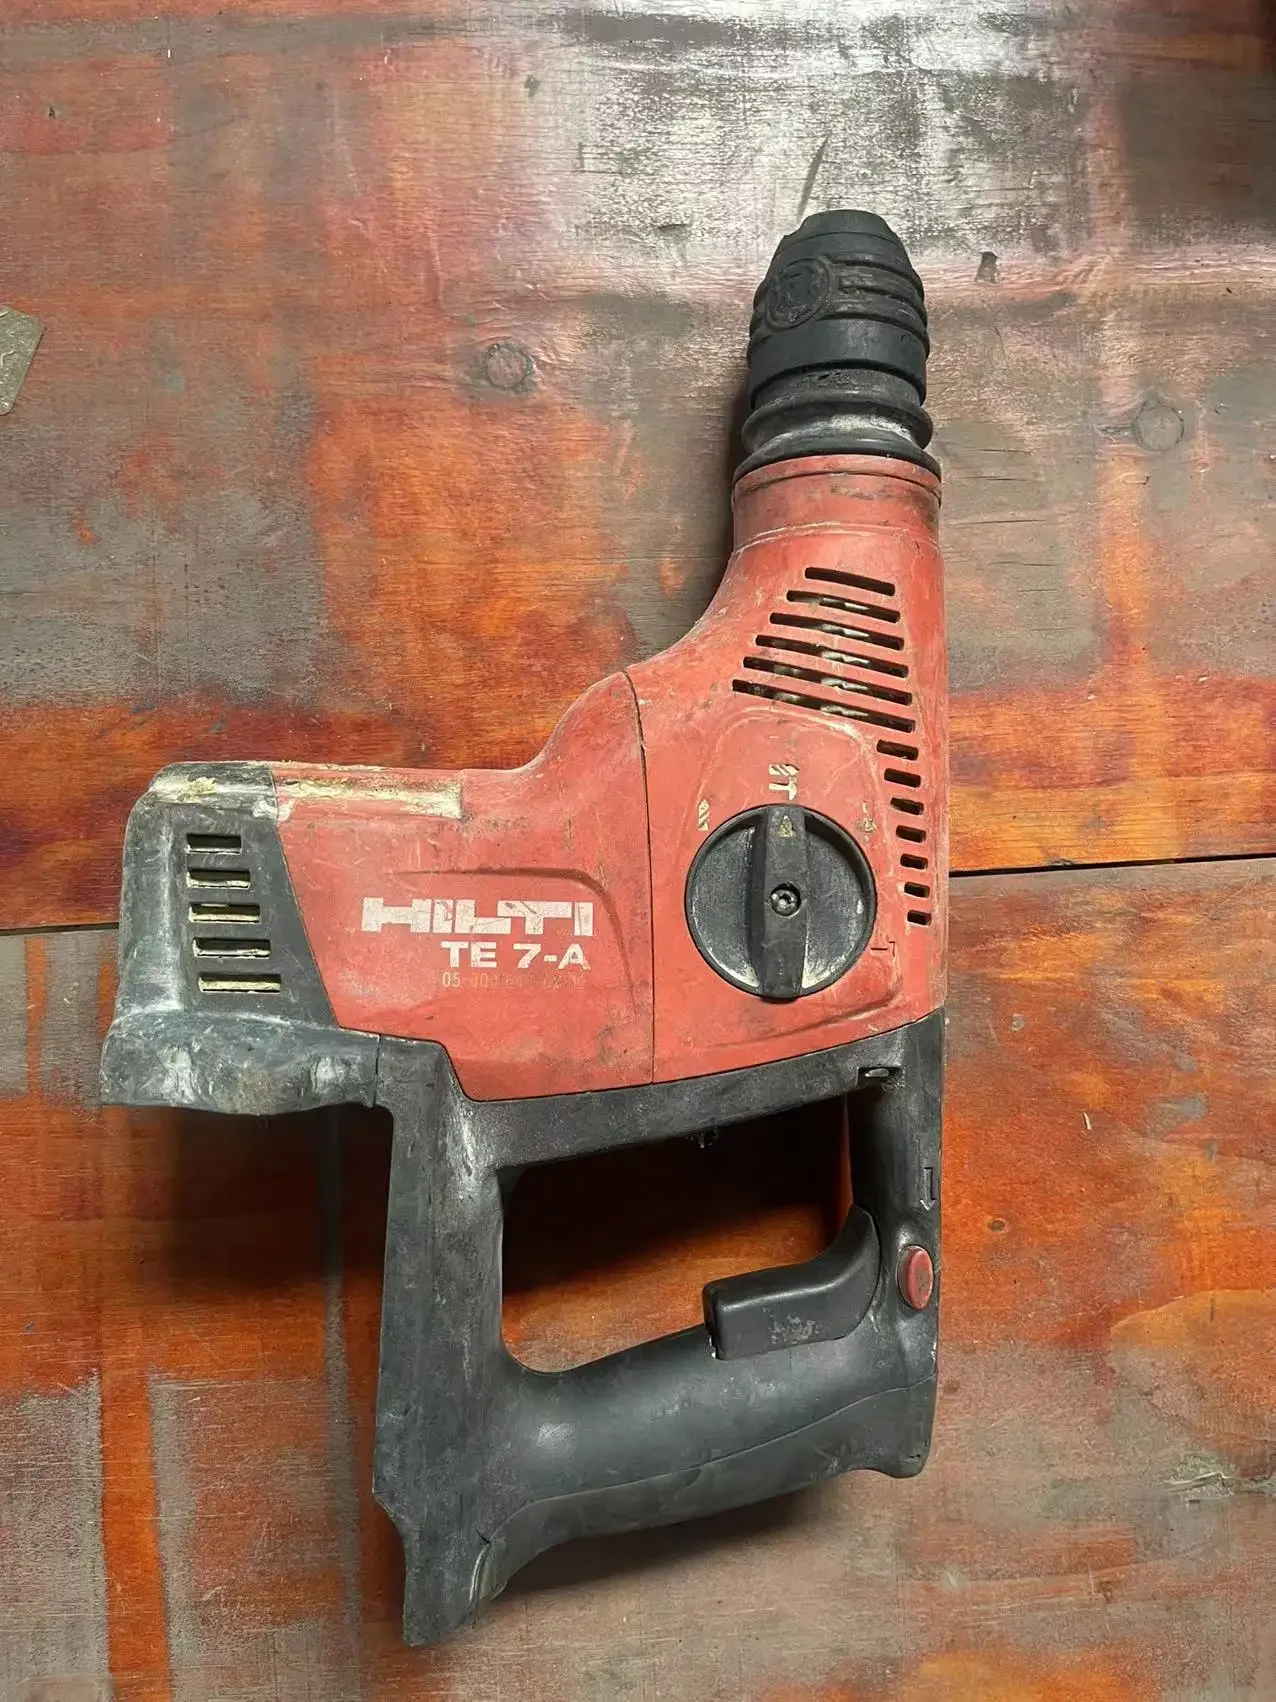 Hilti TE 7-A 36 Heavy Duty HAMMER .USED.SECOND HAND hilti te 7 a 36 heavy duty hammer used second hand